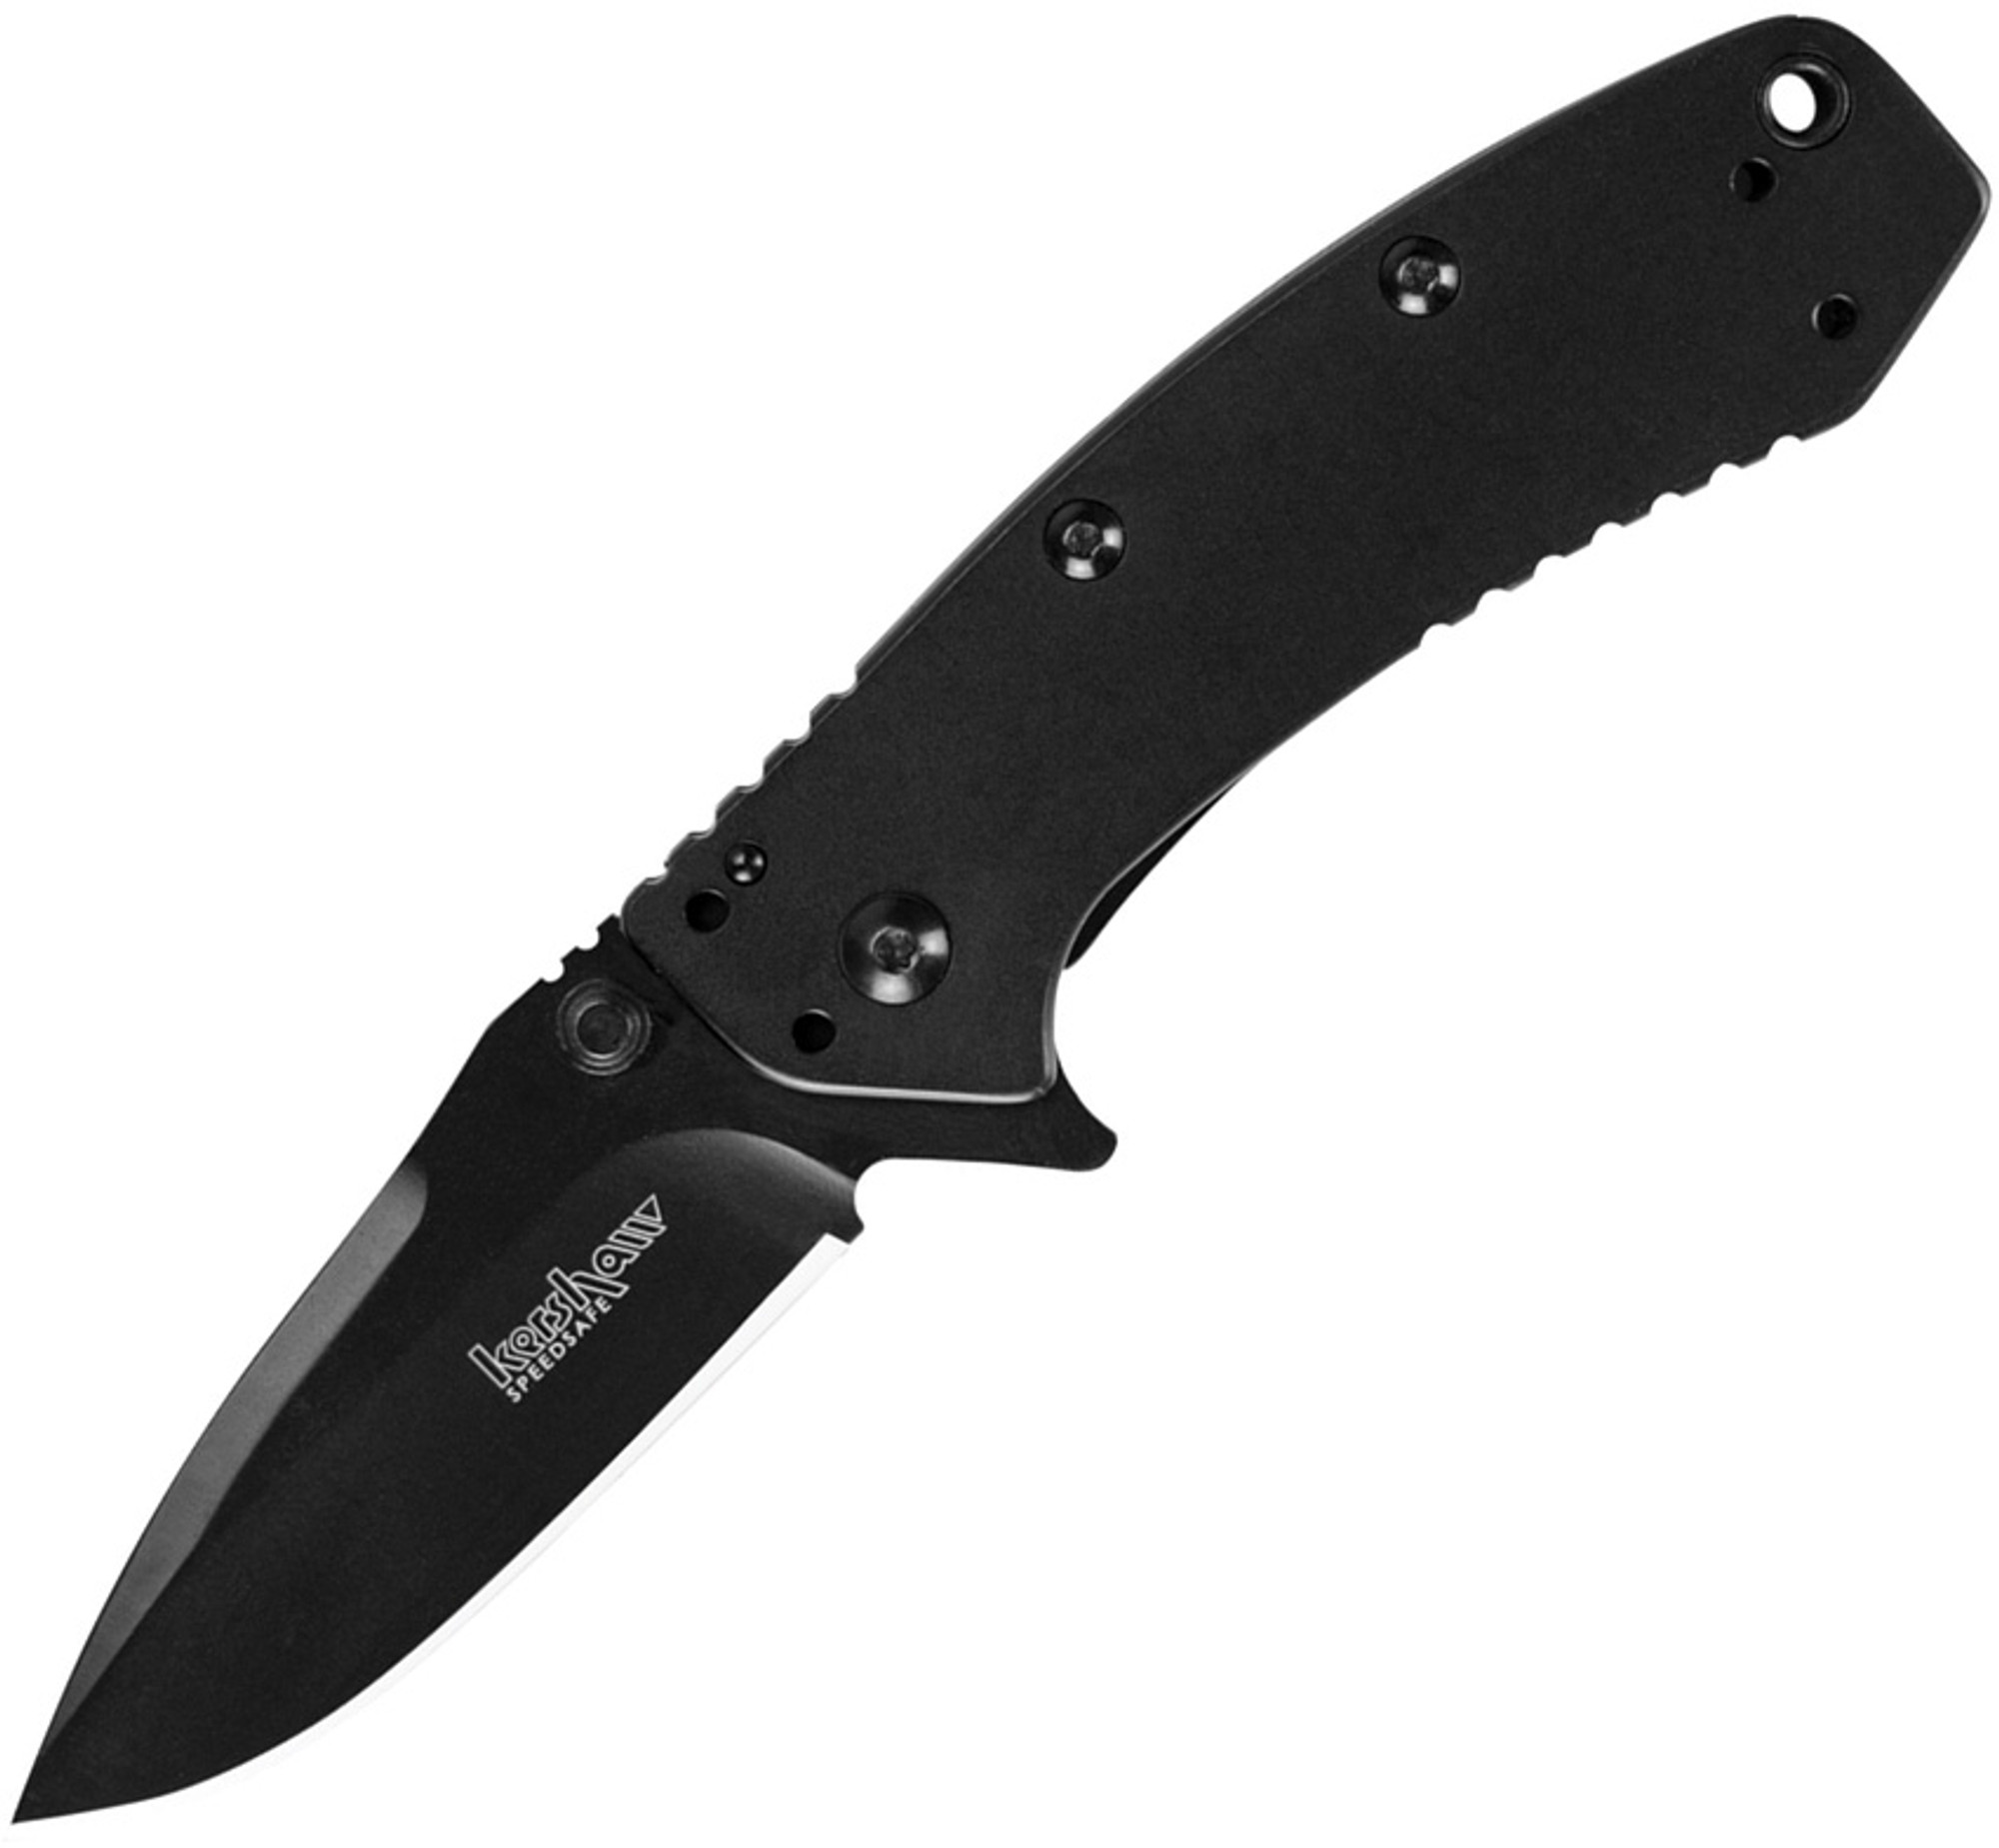 Kershaw 1556BLK Cryo II Black Hinderer Assisted Opening